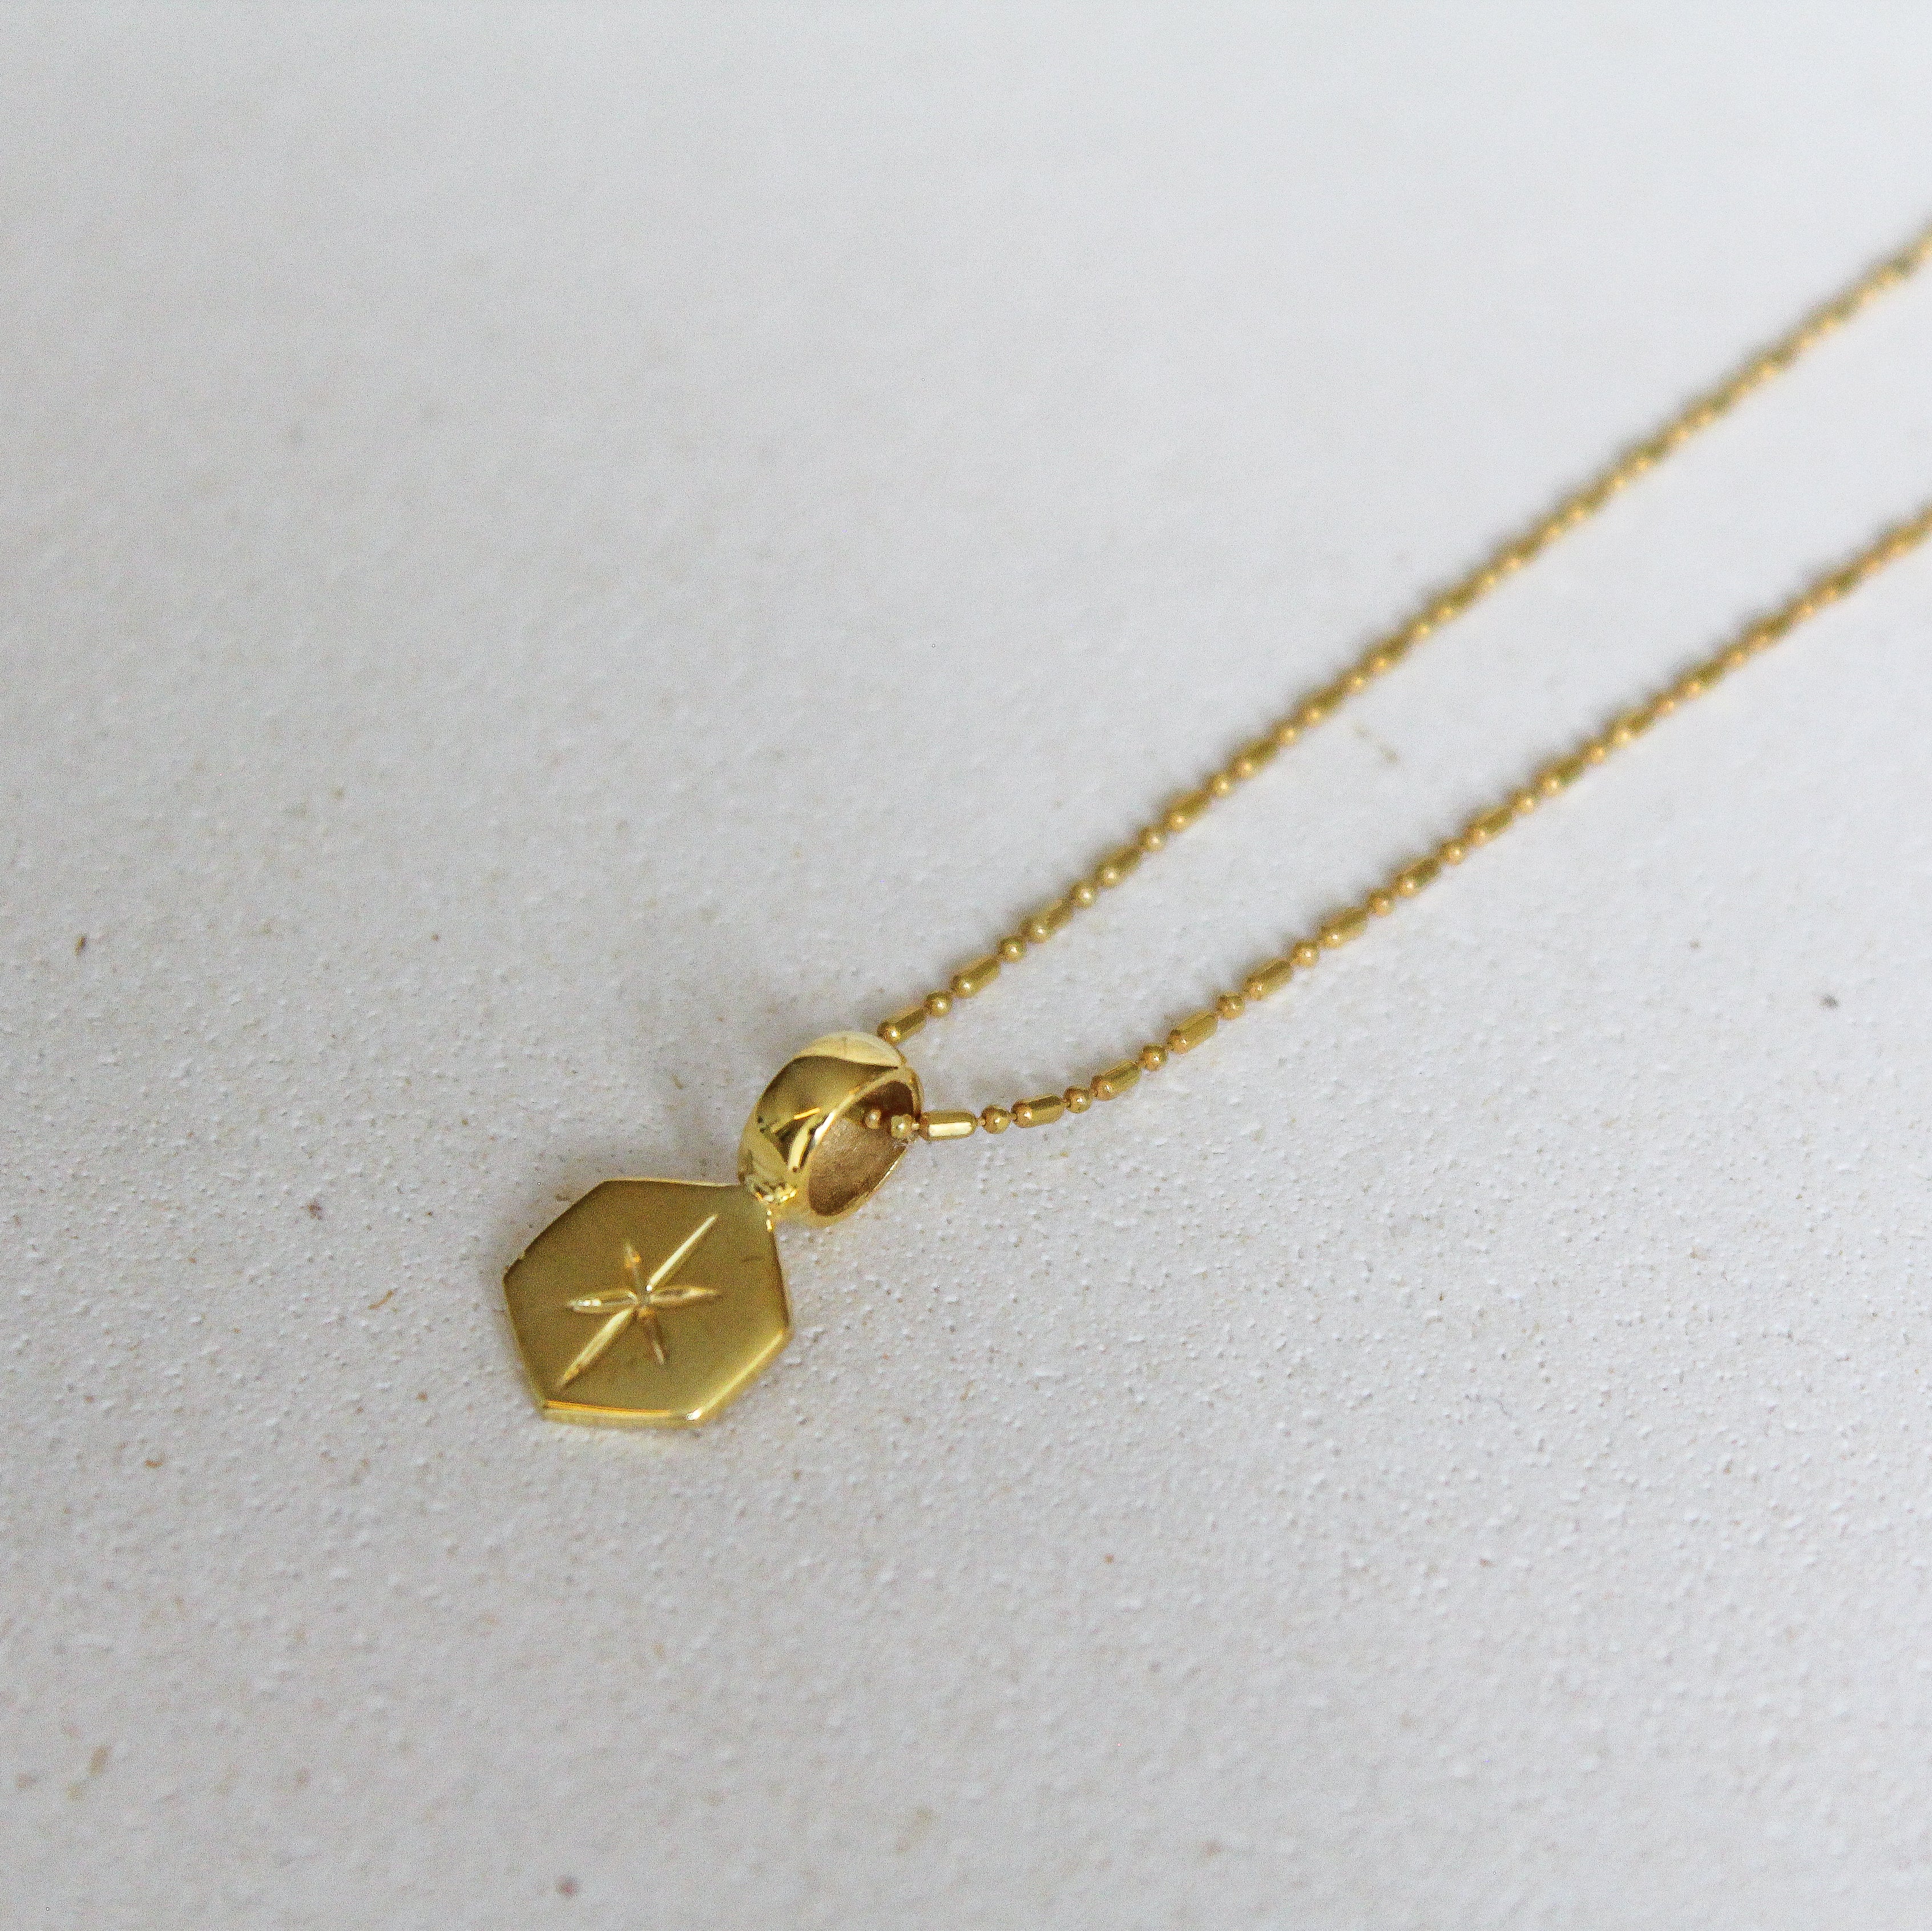 POLARIS NECKLACE - HERKIMER (GOLD PLATED)